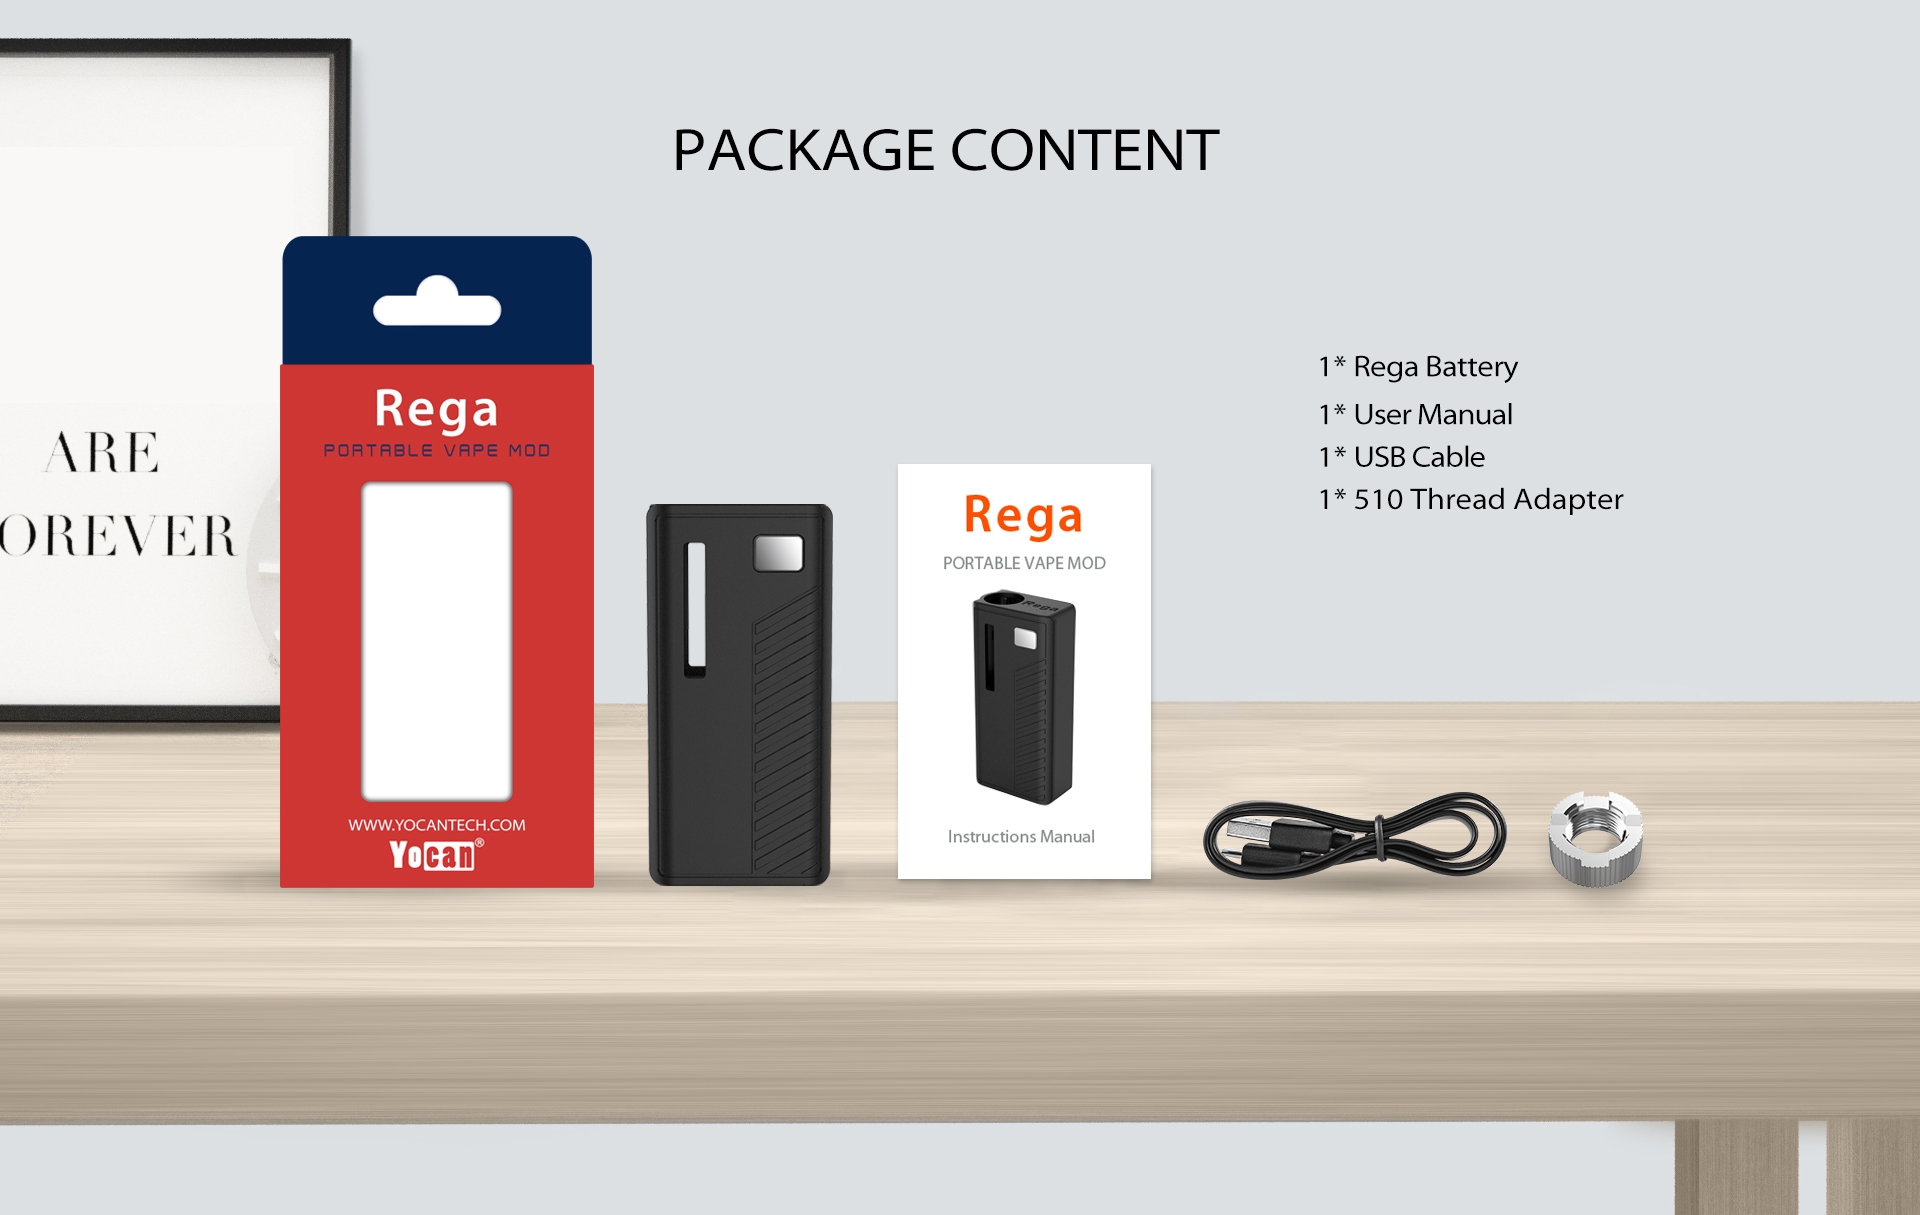 The Yocan Rega Box Mod Battery package content.